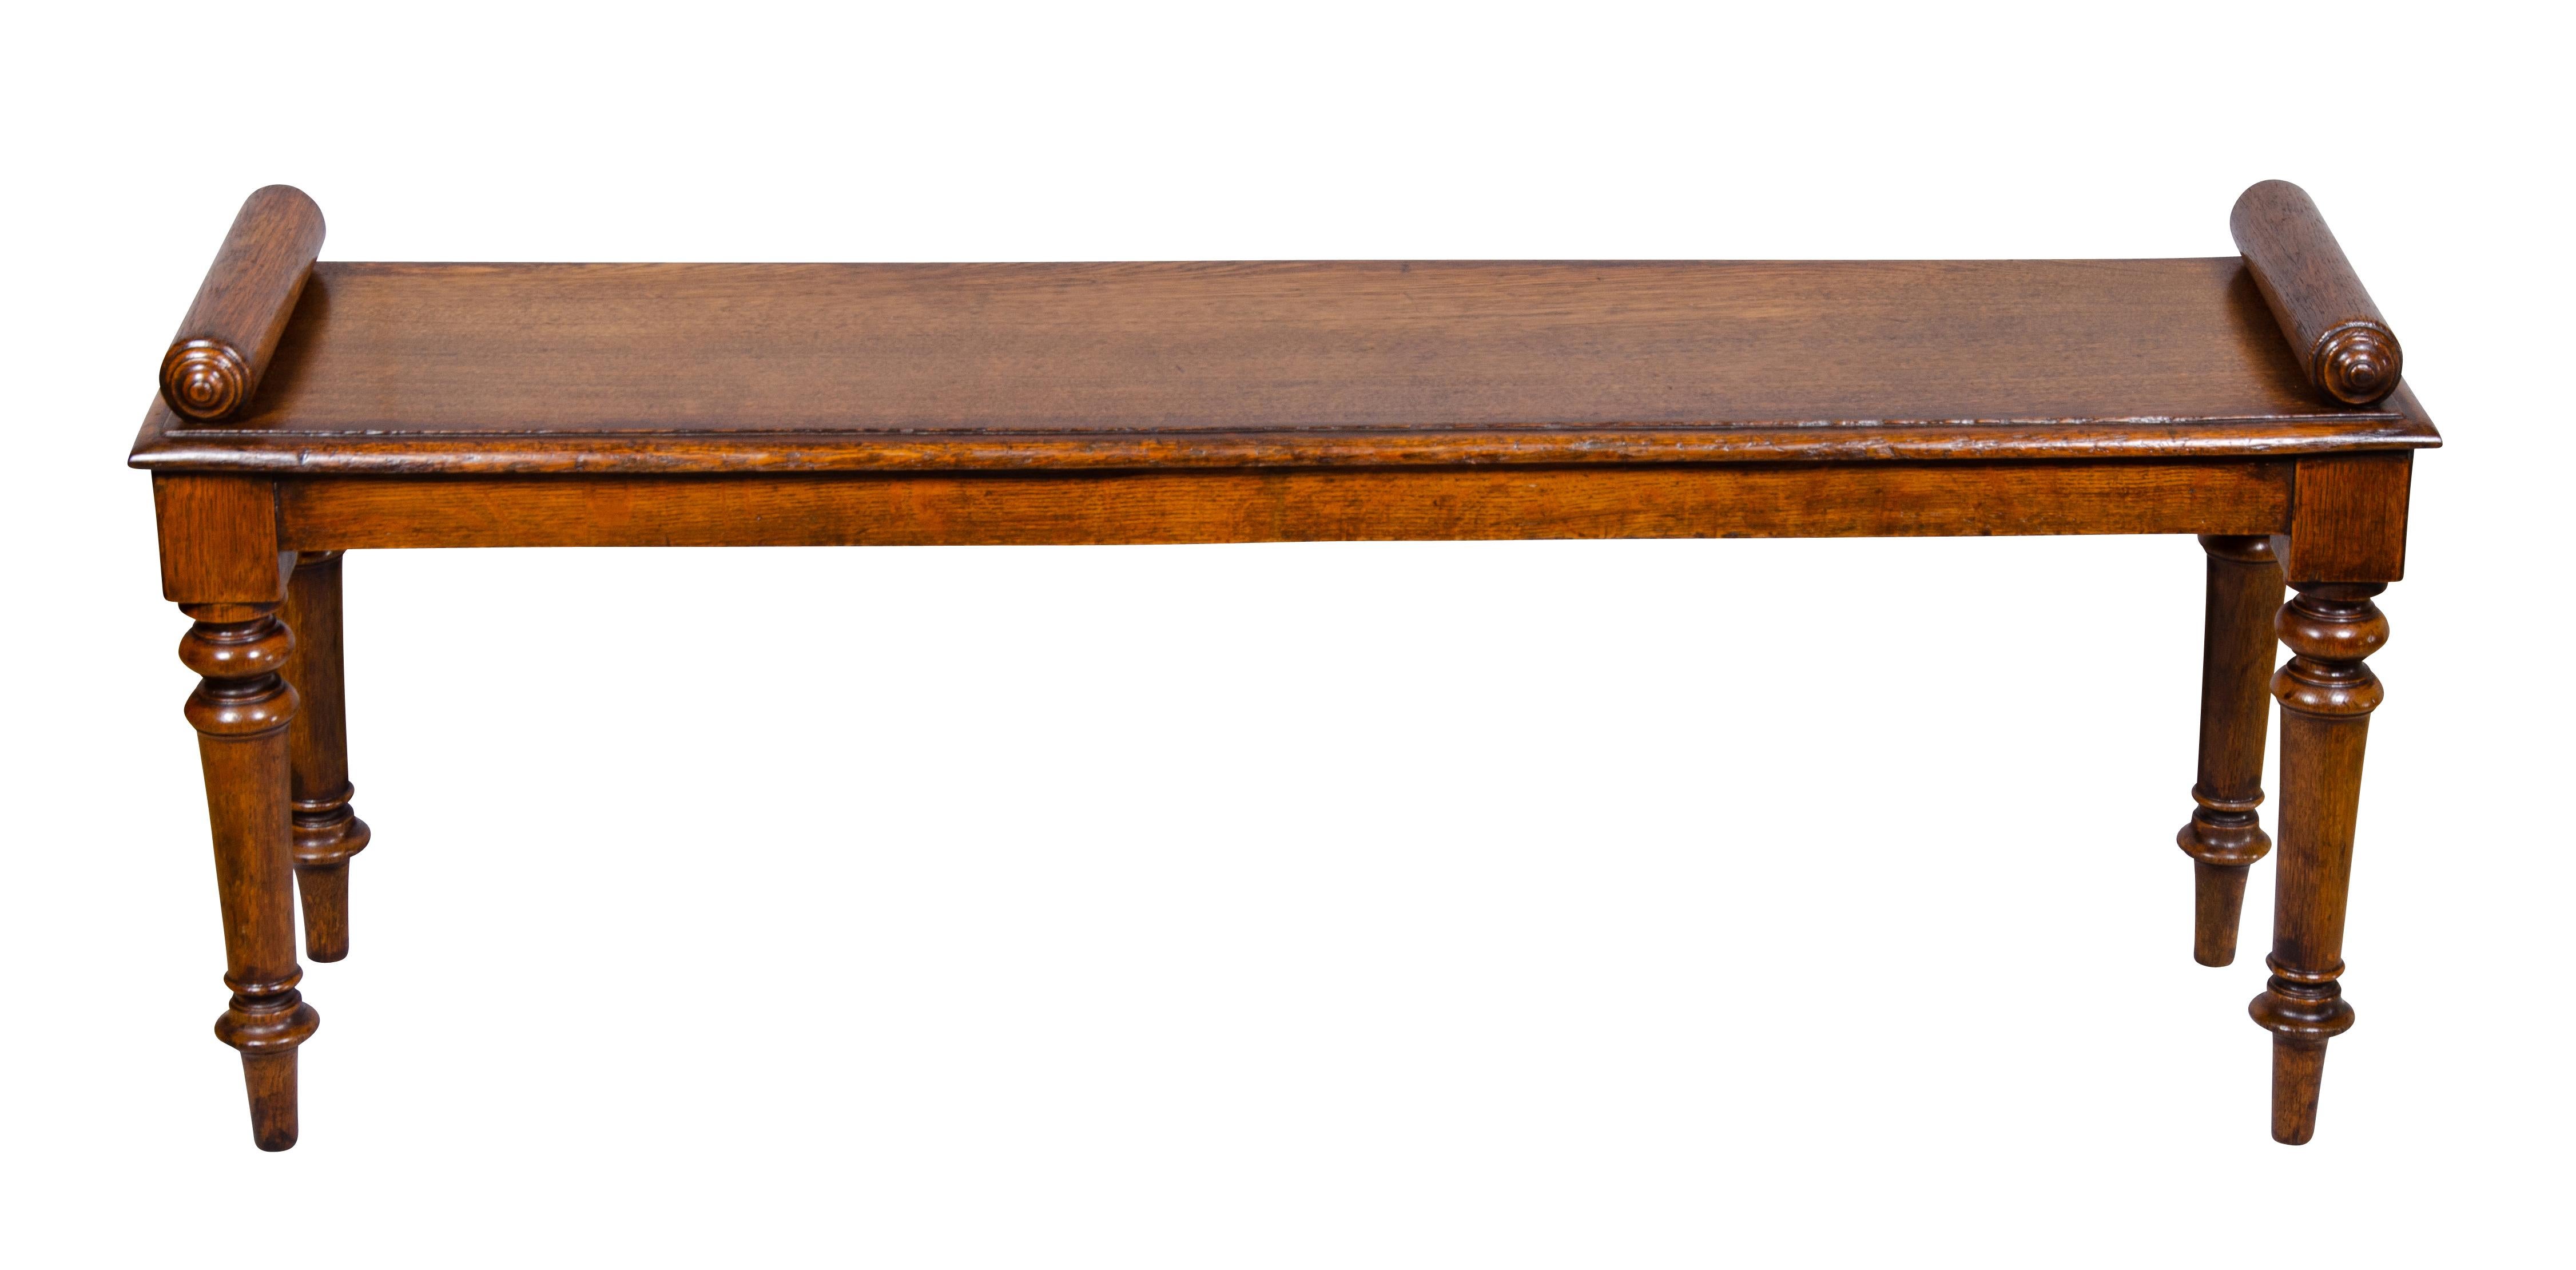 Edwardian Oak Bench Attributed to Schoolbred 1